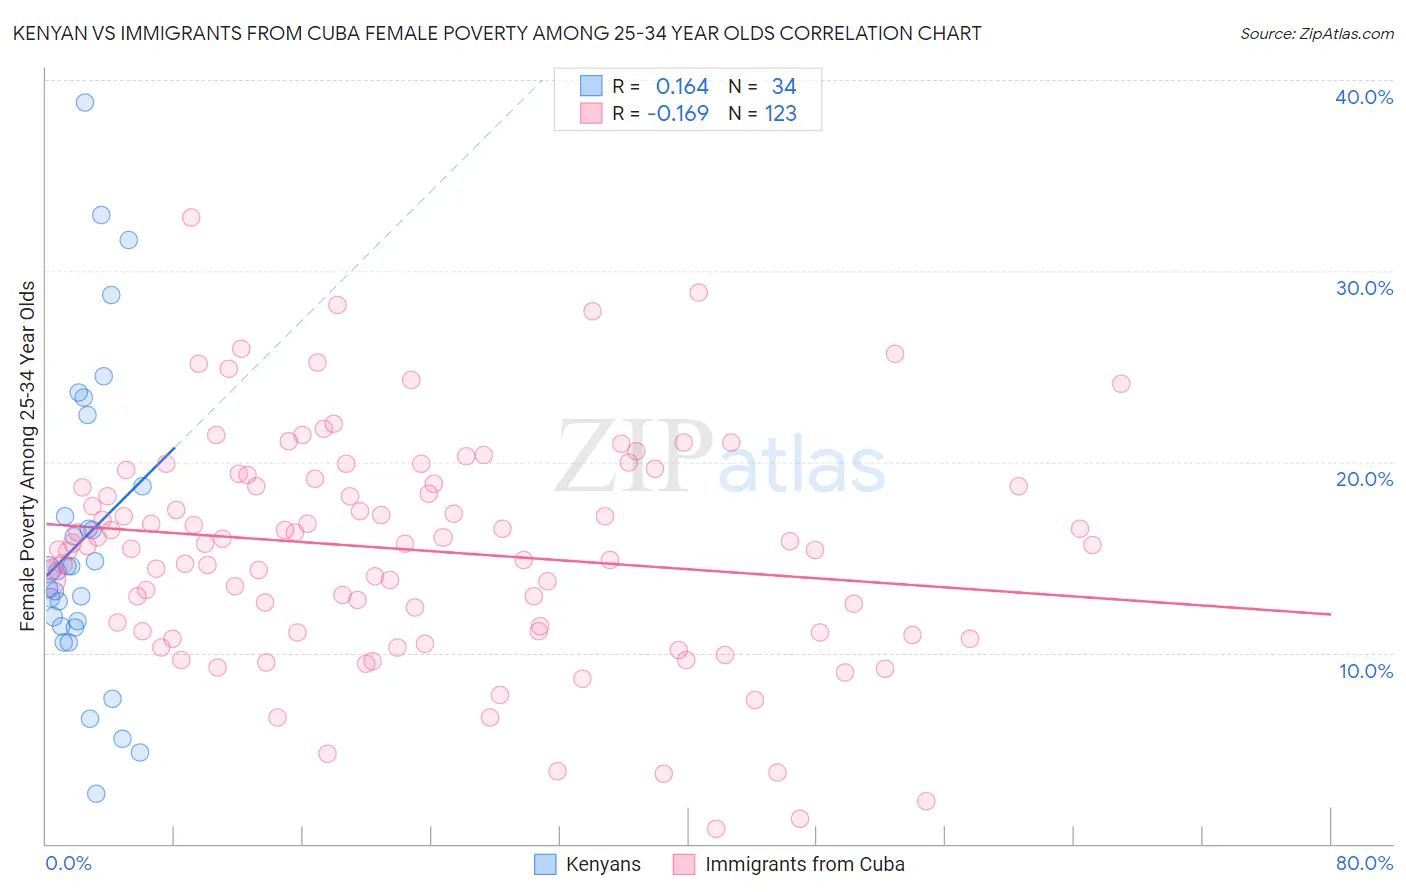 Kenyan vs Immigrants from Cuba Female Poverty Among 25-34 Year Olds